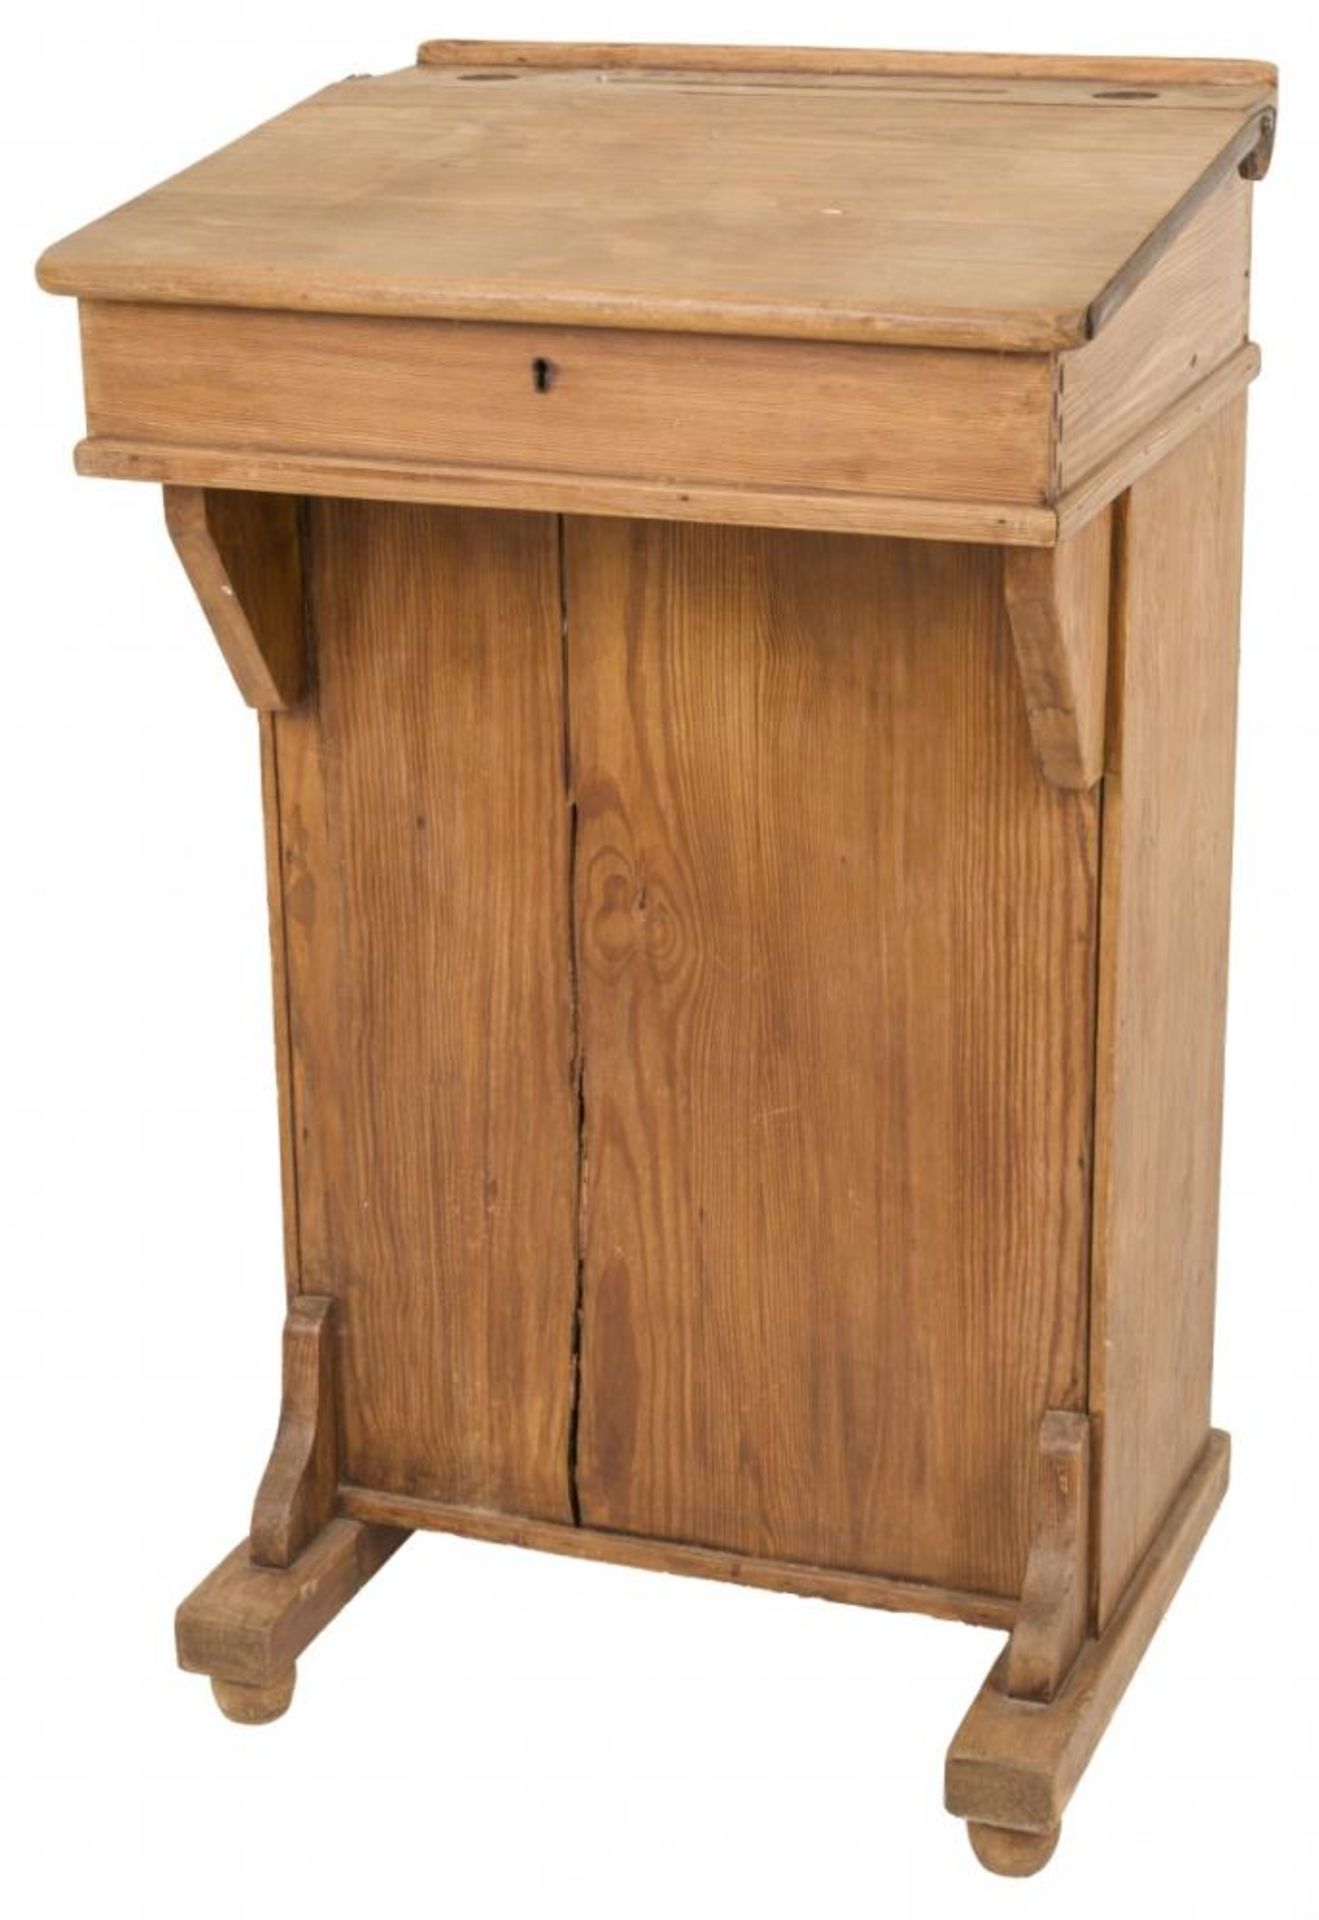 A pinwood lecturers desk or rostrum with lid.